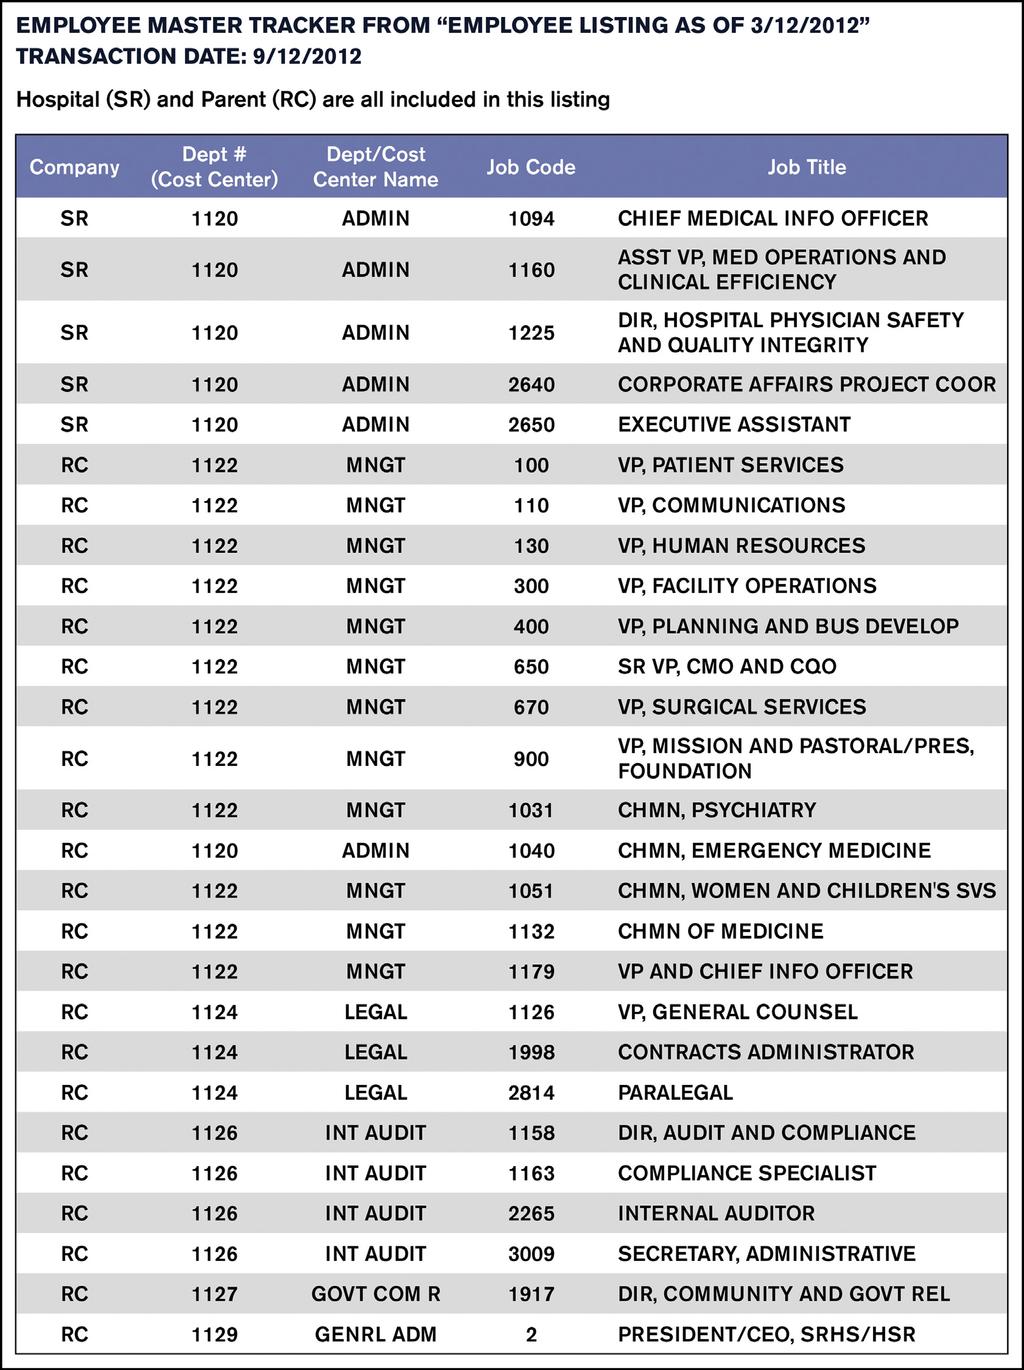 748 The American Journal of Medicine, Vol 126, No 8, August 2013 Figure 2 Employee Tracker.